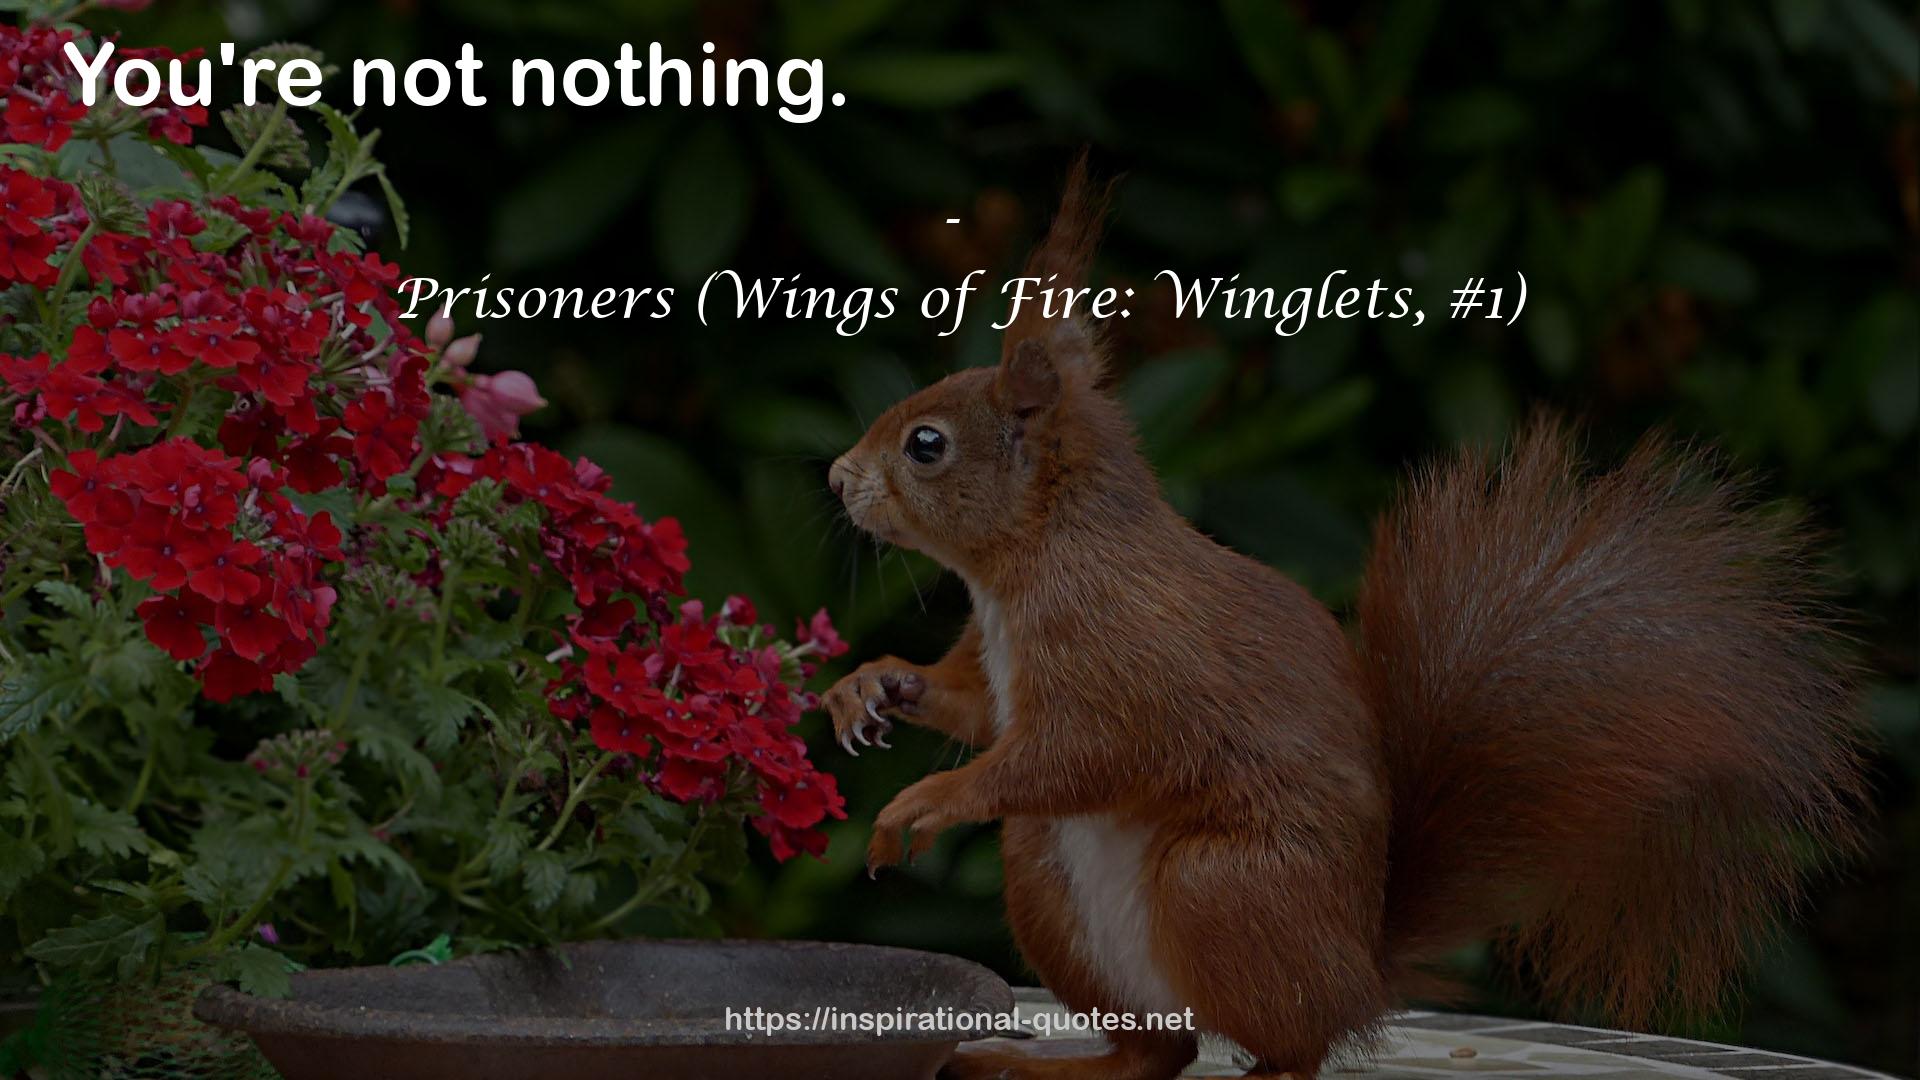 Prisoners (Wings of Fire: Winglets, #1) QUOTES